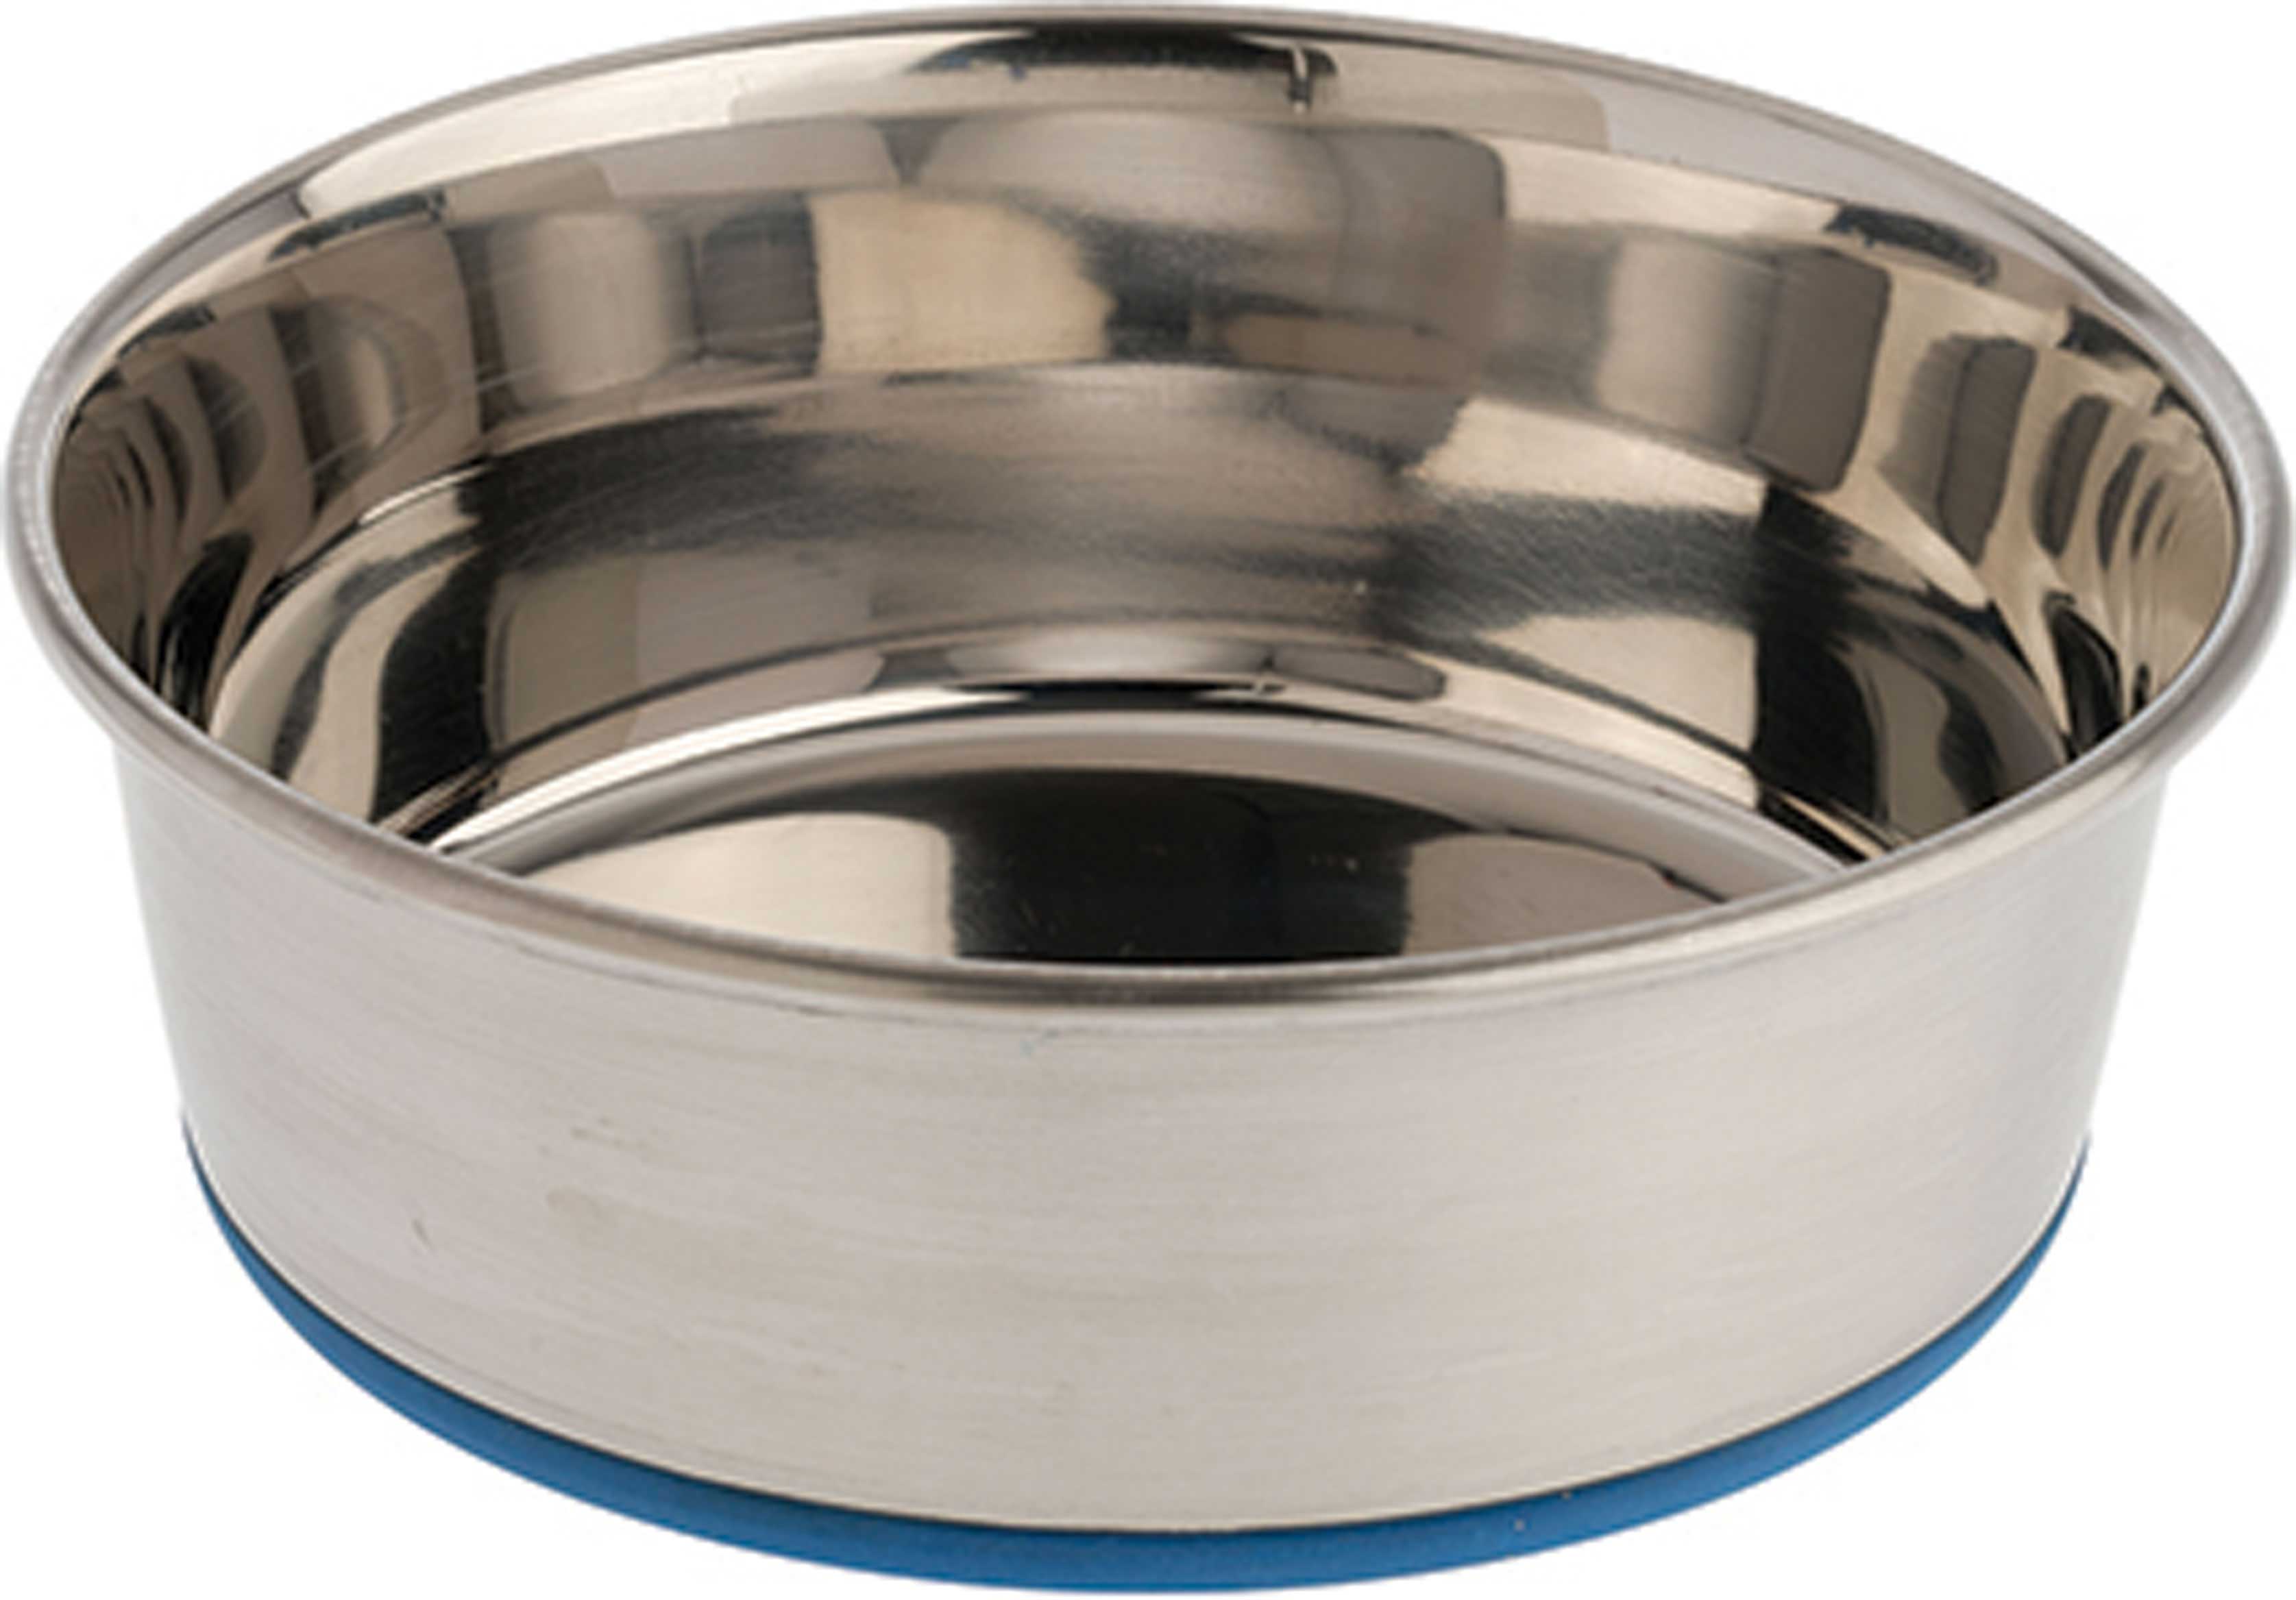 Our Pets Durapet Stainless Steel Bowl, 7 Cups